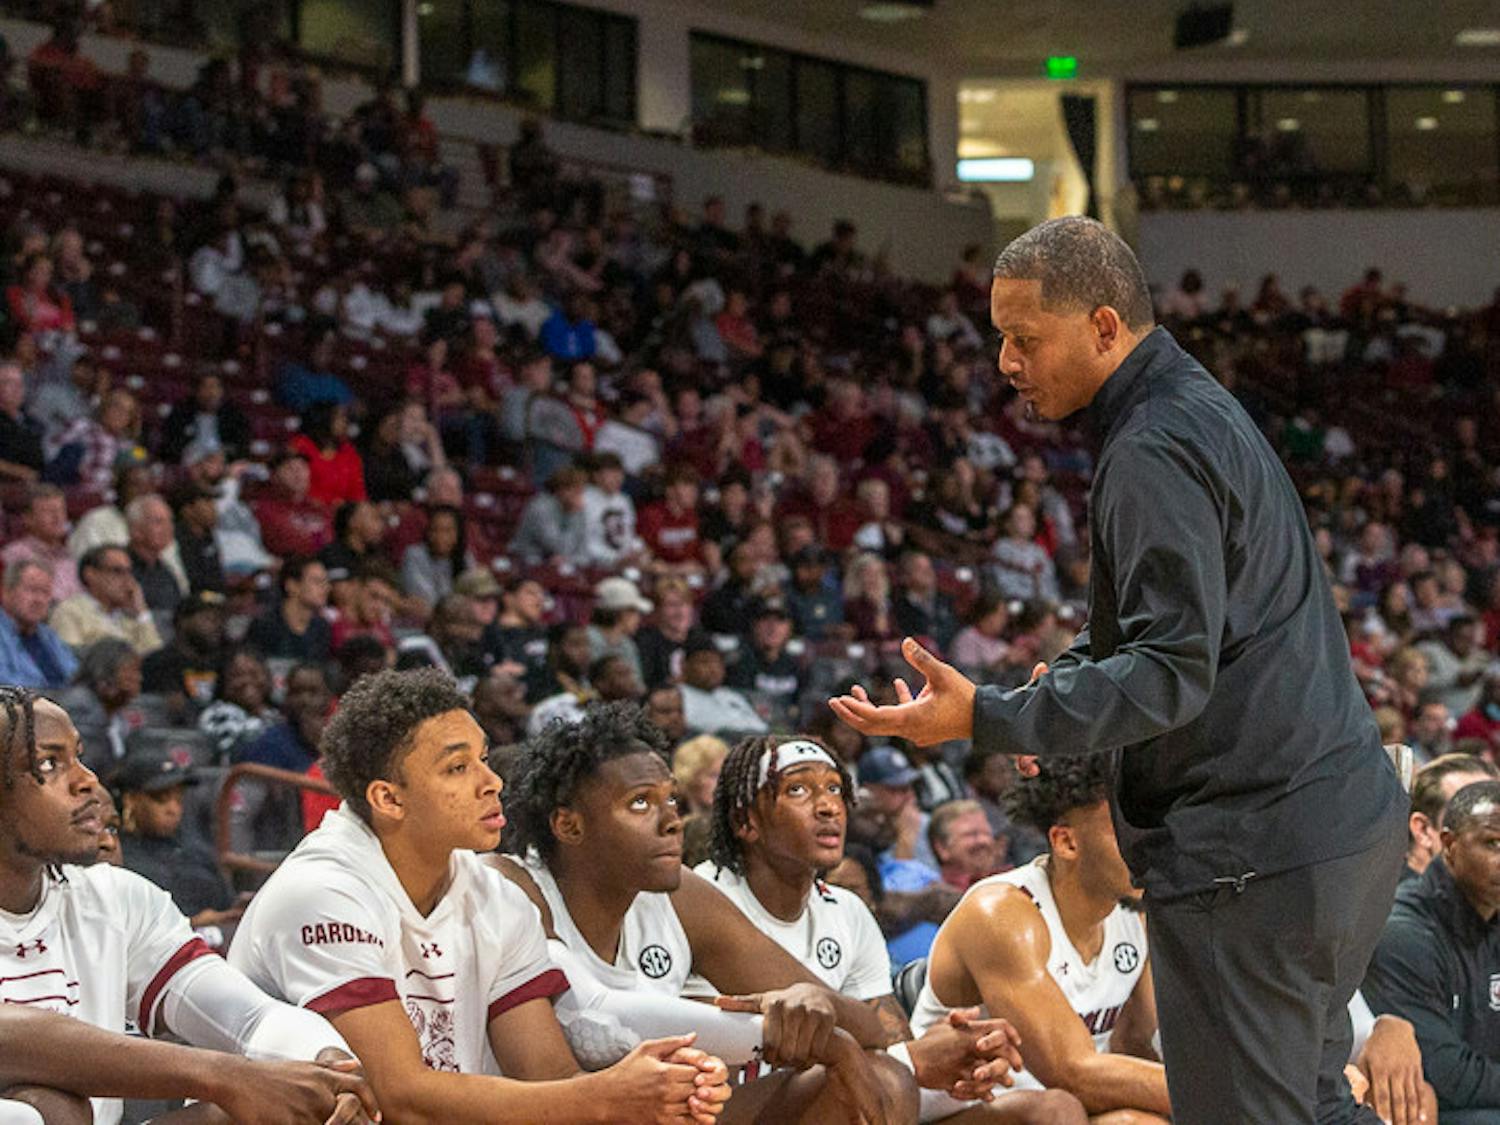 South Carolina head coach Lamont Paris provides feedback to his team during the second half of the men’s basketball season opener. The team defeated the S.C State Bulldogs 80-77 in Paris' first game as head coach.